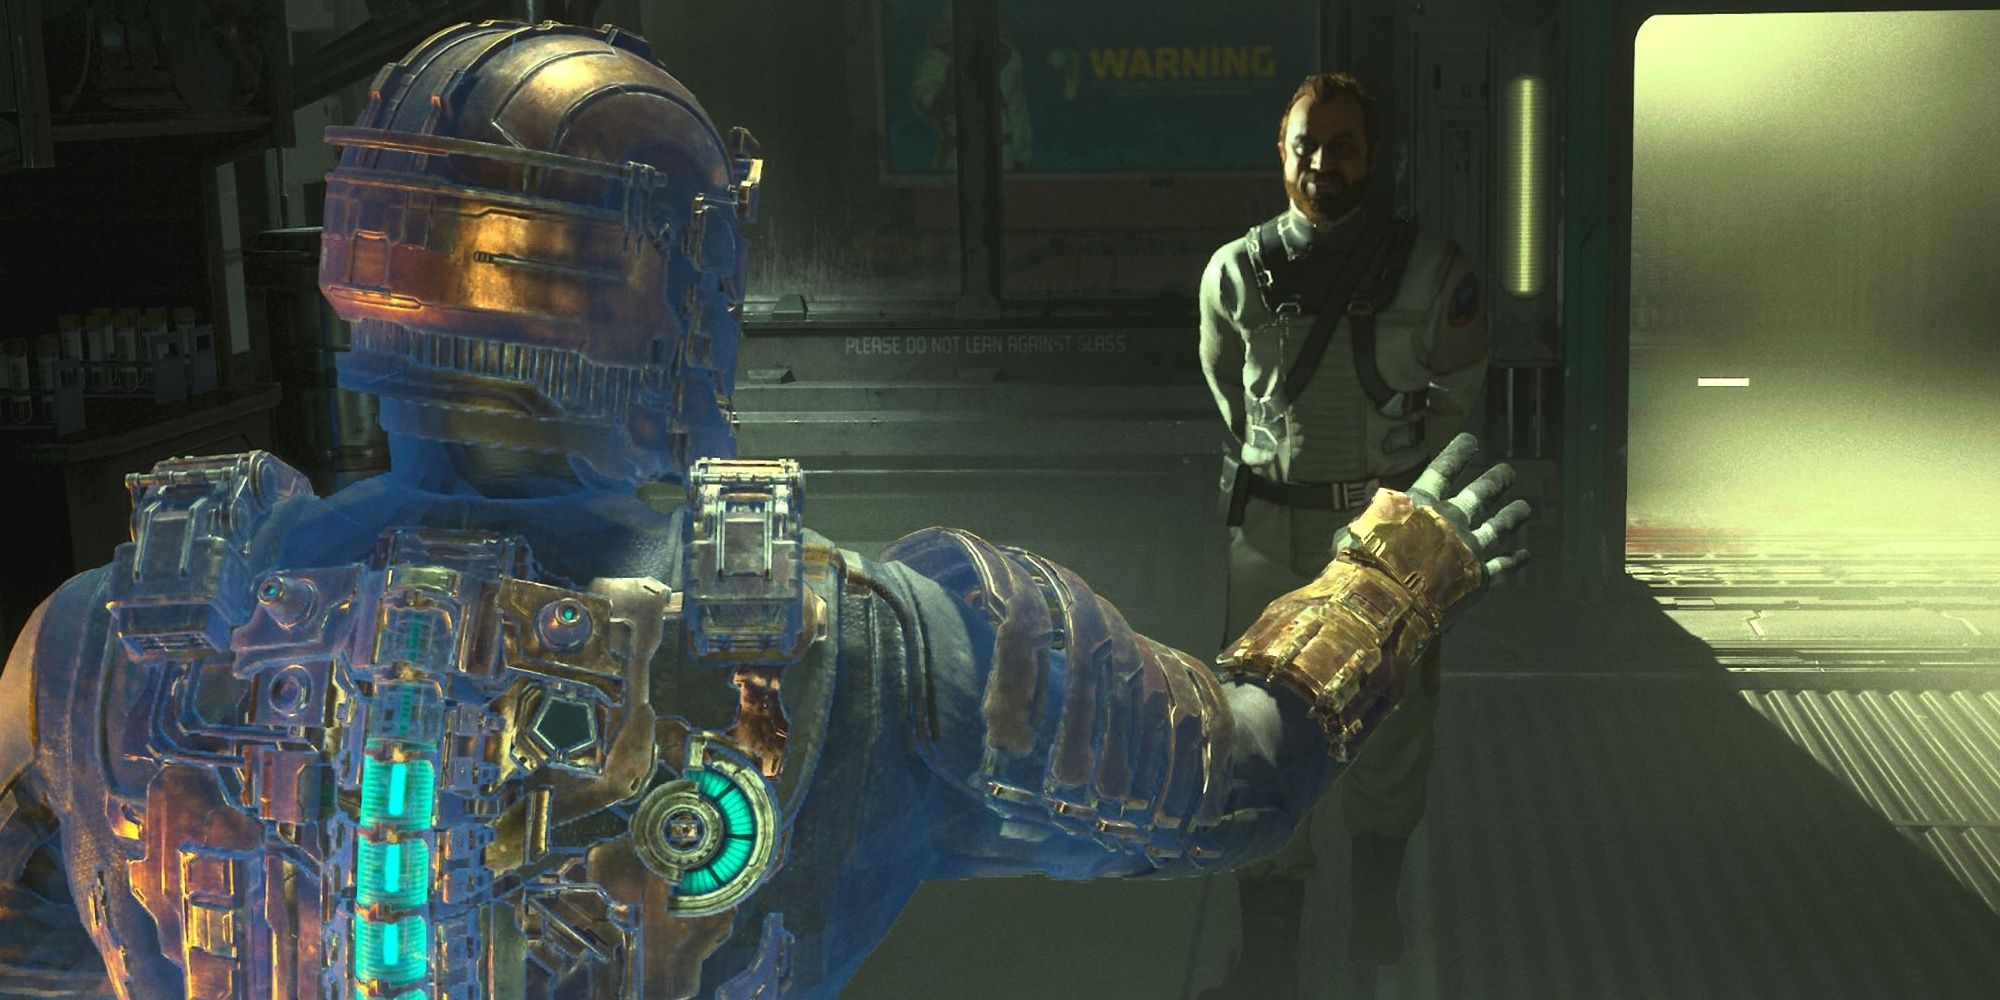 Isaac being stuck in stasis during an encounter with Dr. Mercer in the Dead Space remake.